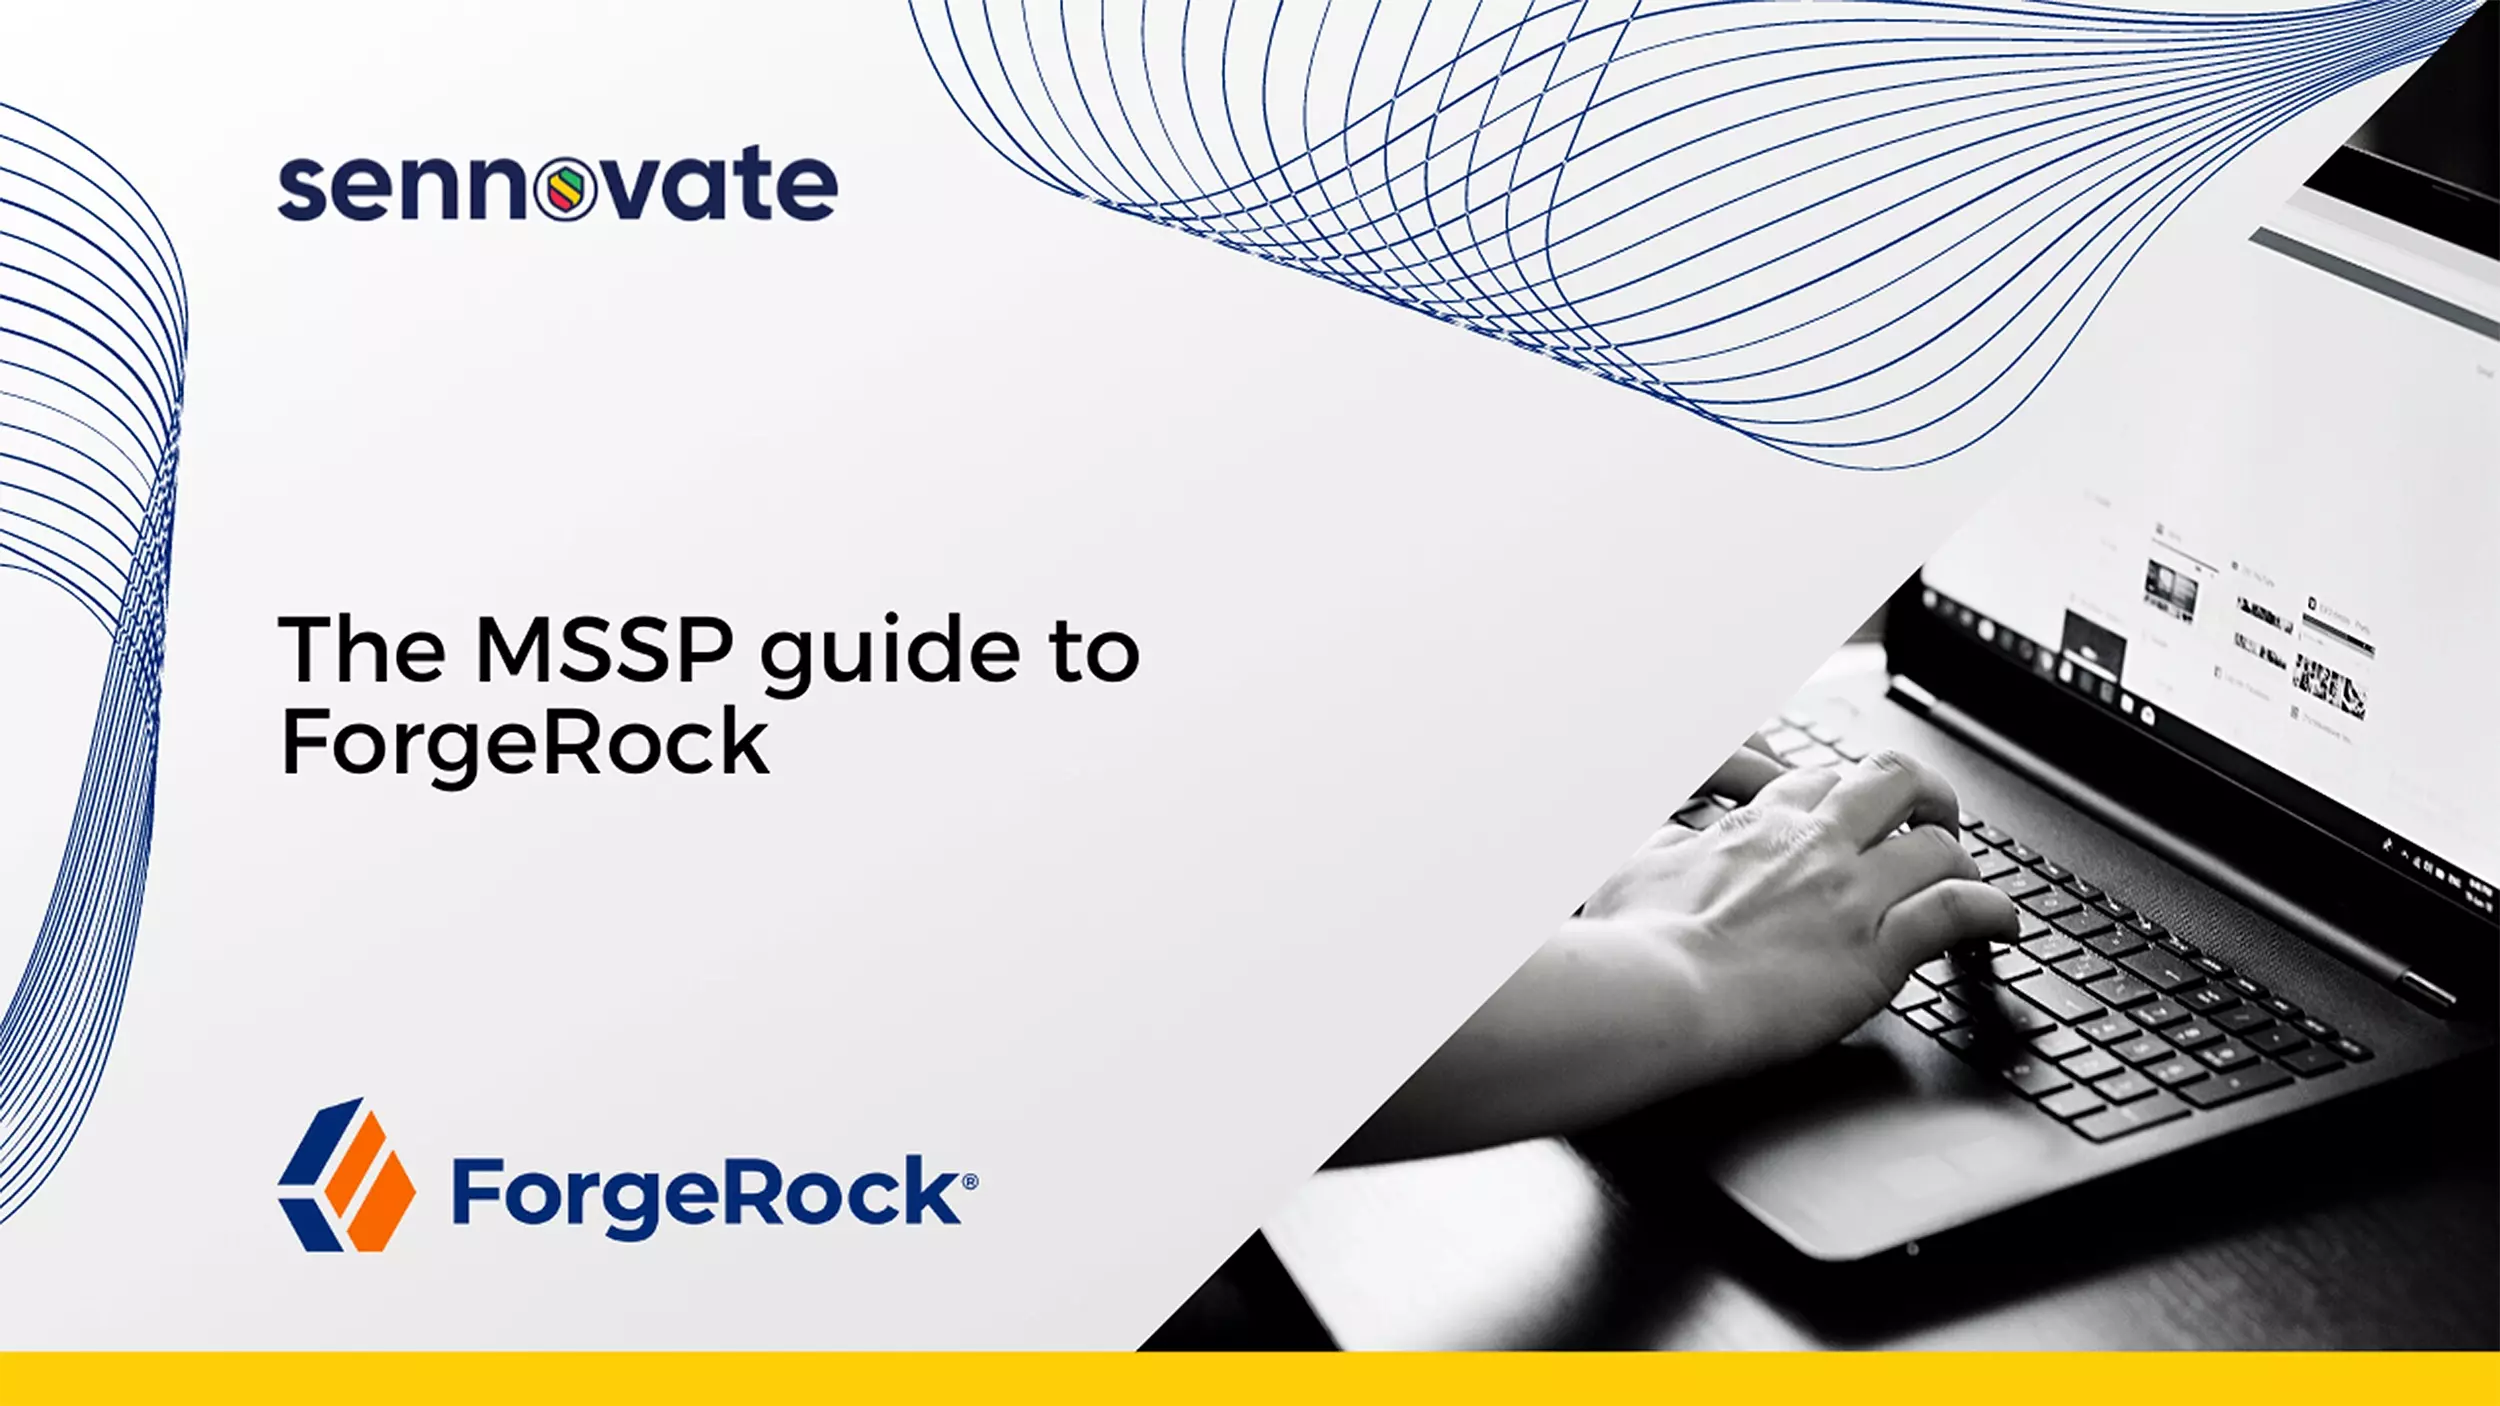 Reasons to choose forgerock and a MSSP guide to forgerock